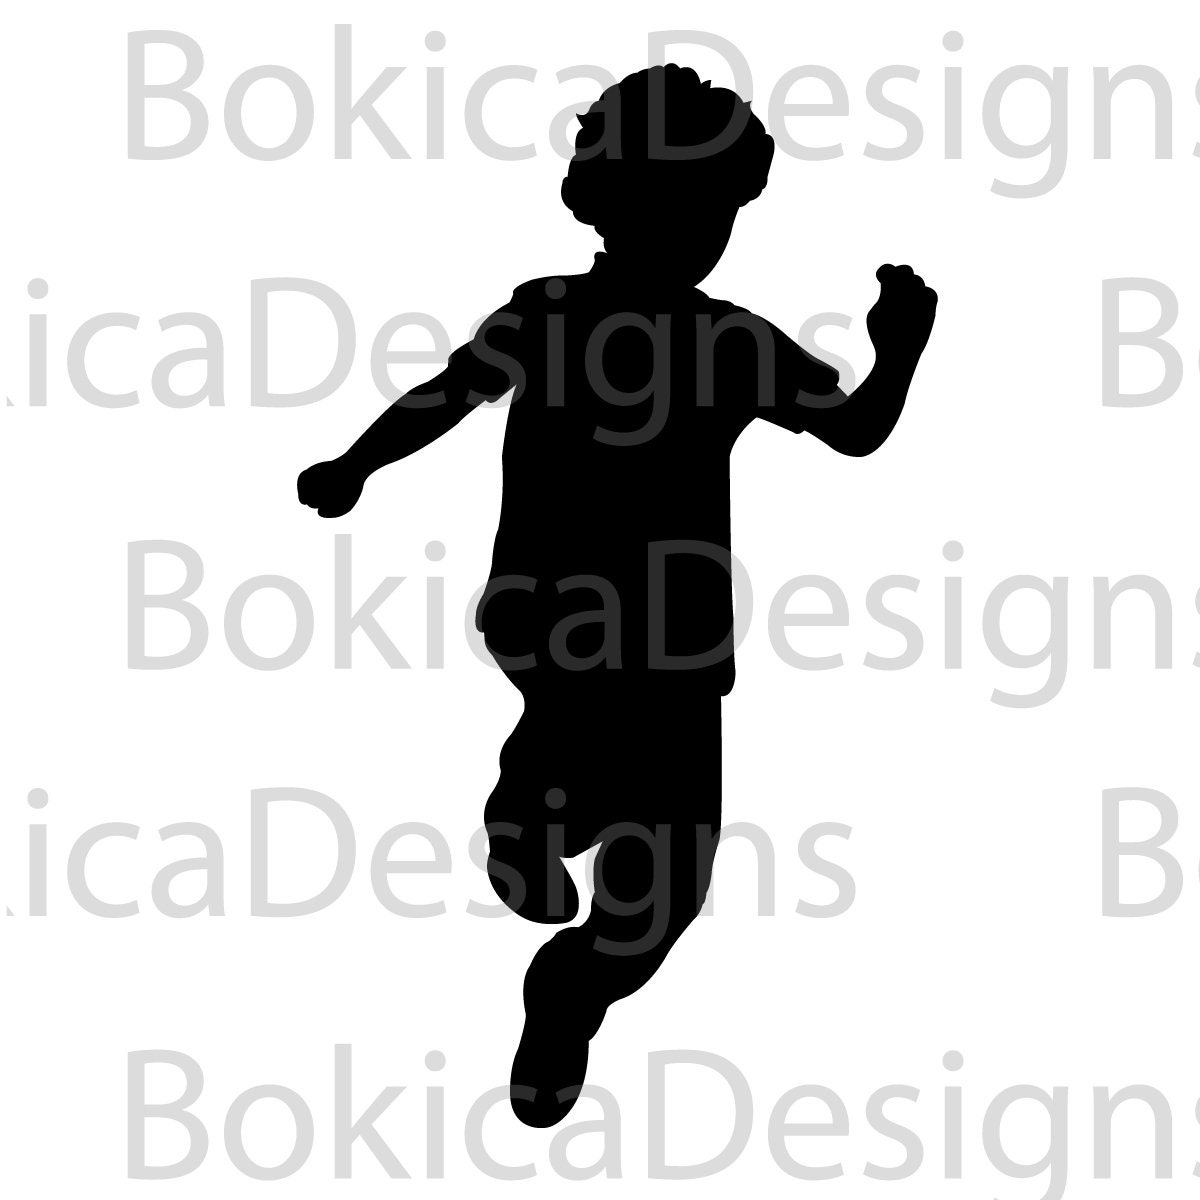 Kids jumping. Silhouettes of kids. Children party. Kids camp sport  illustration. Jump kids on white background. Stock Vector by  ©sofiartmedia.gmail.com 119360712